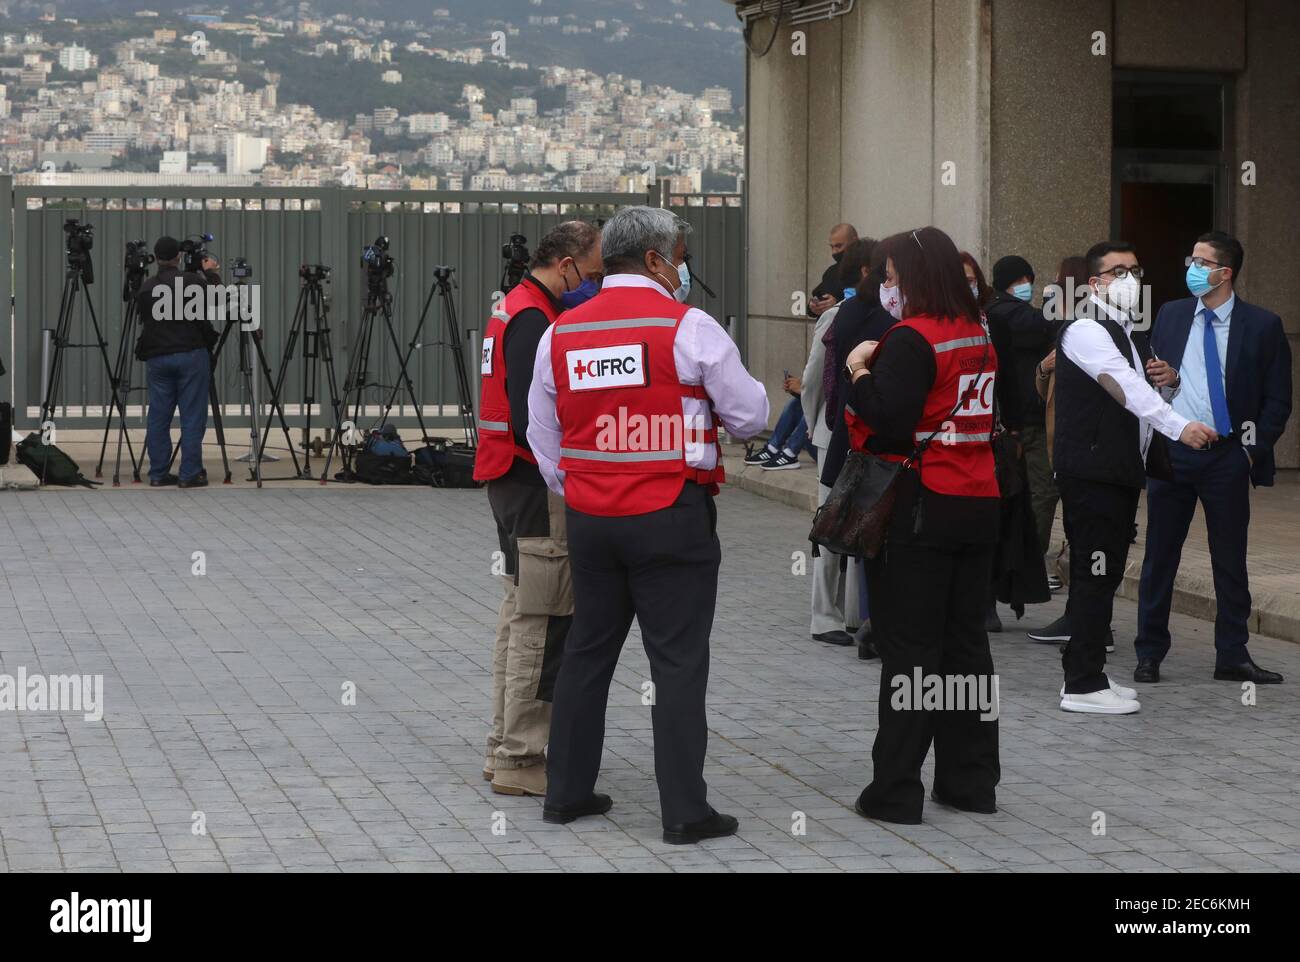 Members of International Federation of Red Cross and Red Crescent Societies  (IFRC) are pictured at Beirut International Airport before the arrival of  the first batch of doses of the Pfizer/BioNTech vaccine against